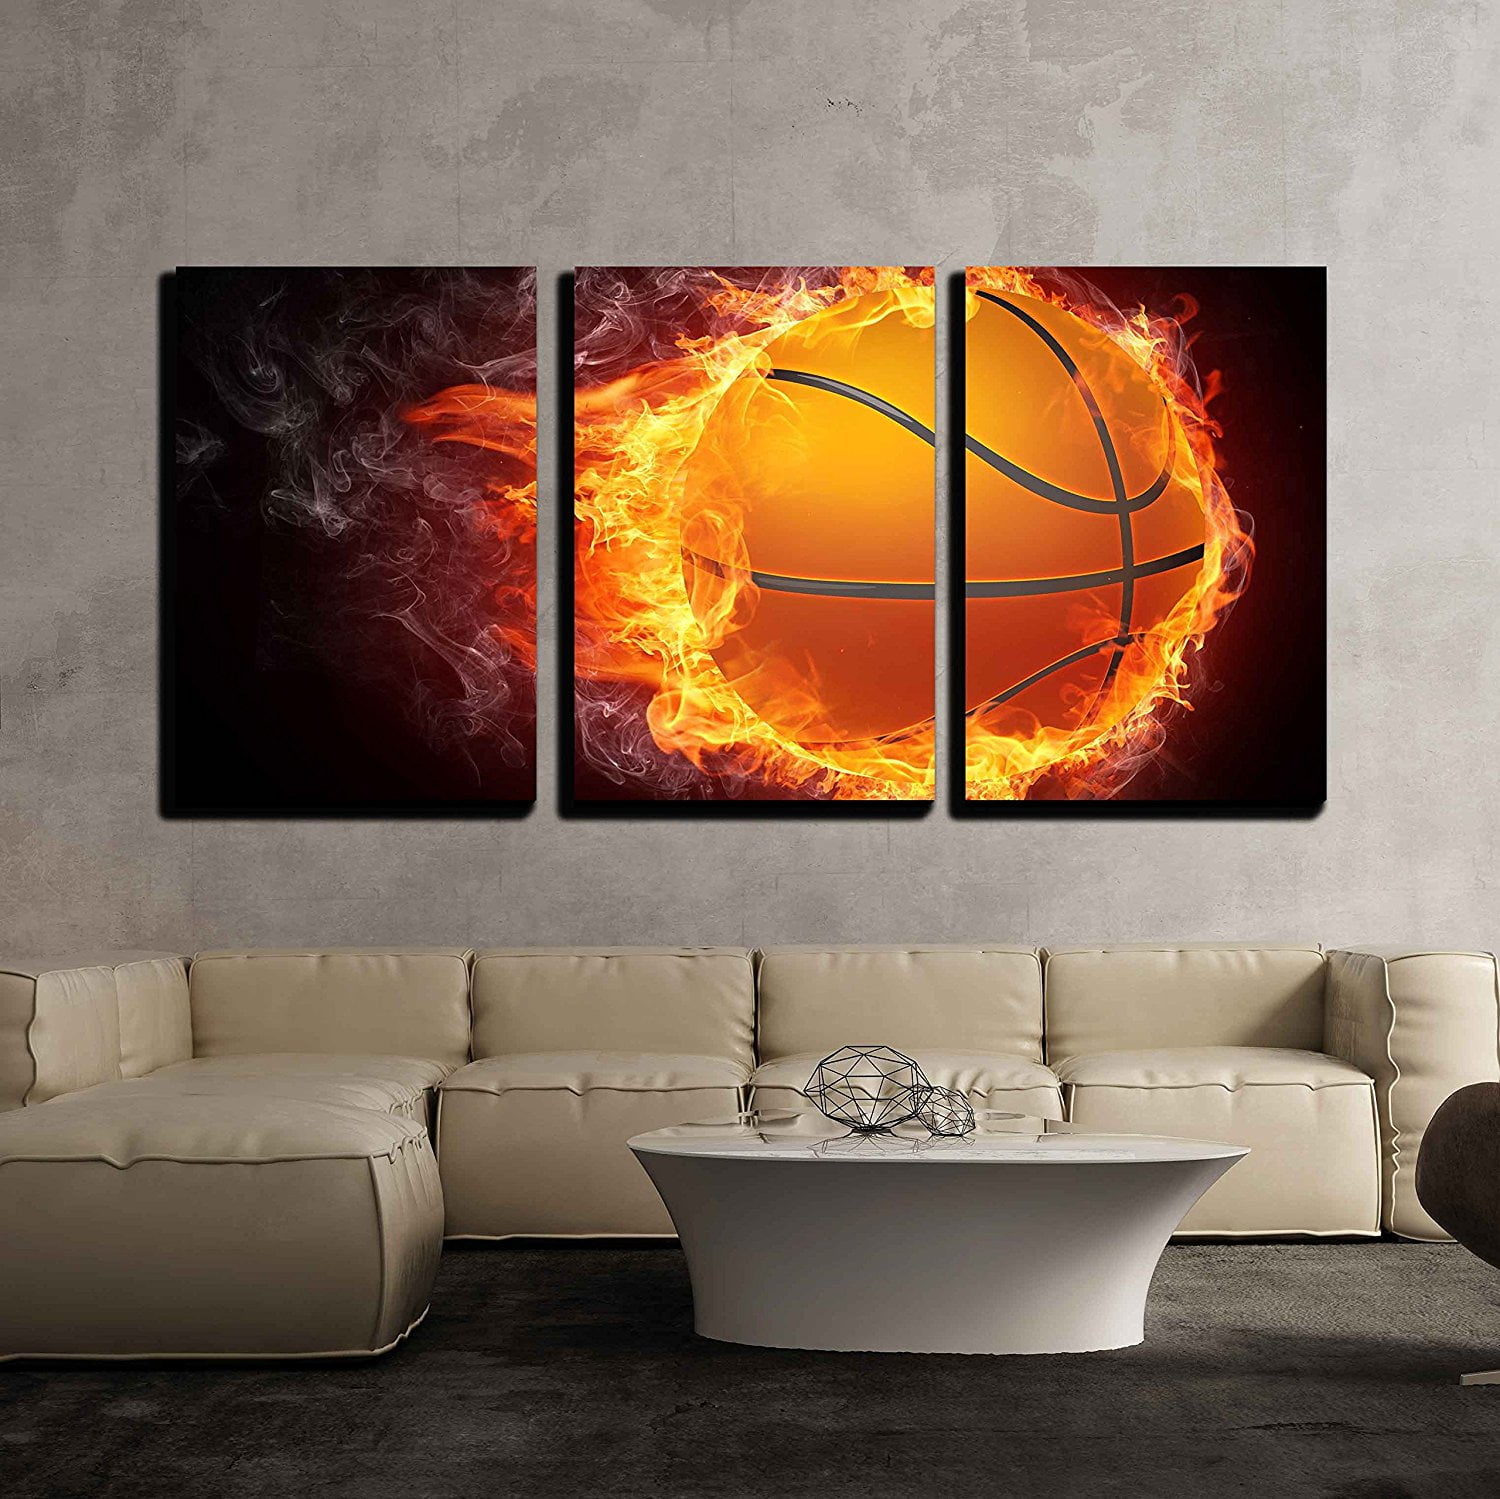 Lacrosse Head And Ball Art Print Home Decor Wall Art Poster H 